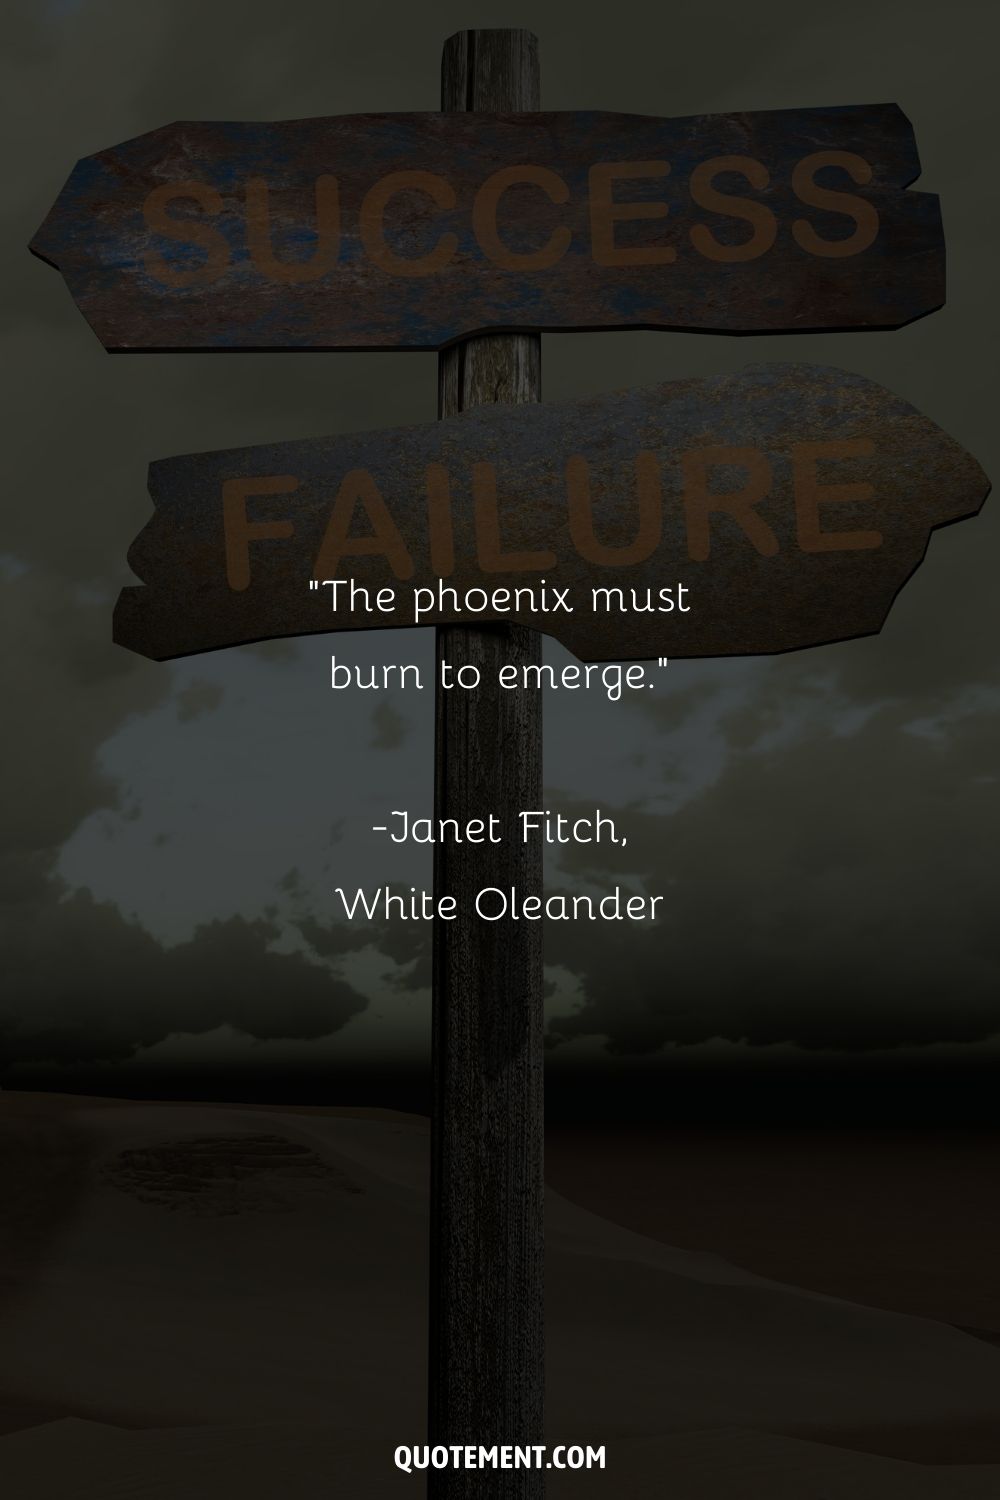 “The phoenix must burn to emerge.” ― Janet Fitch, White Oleander